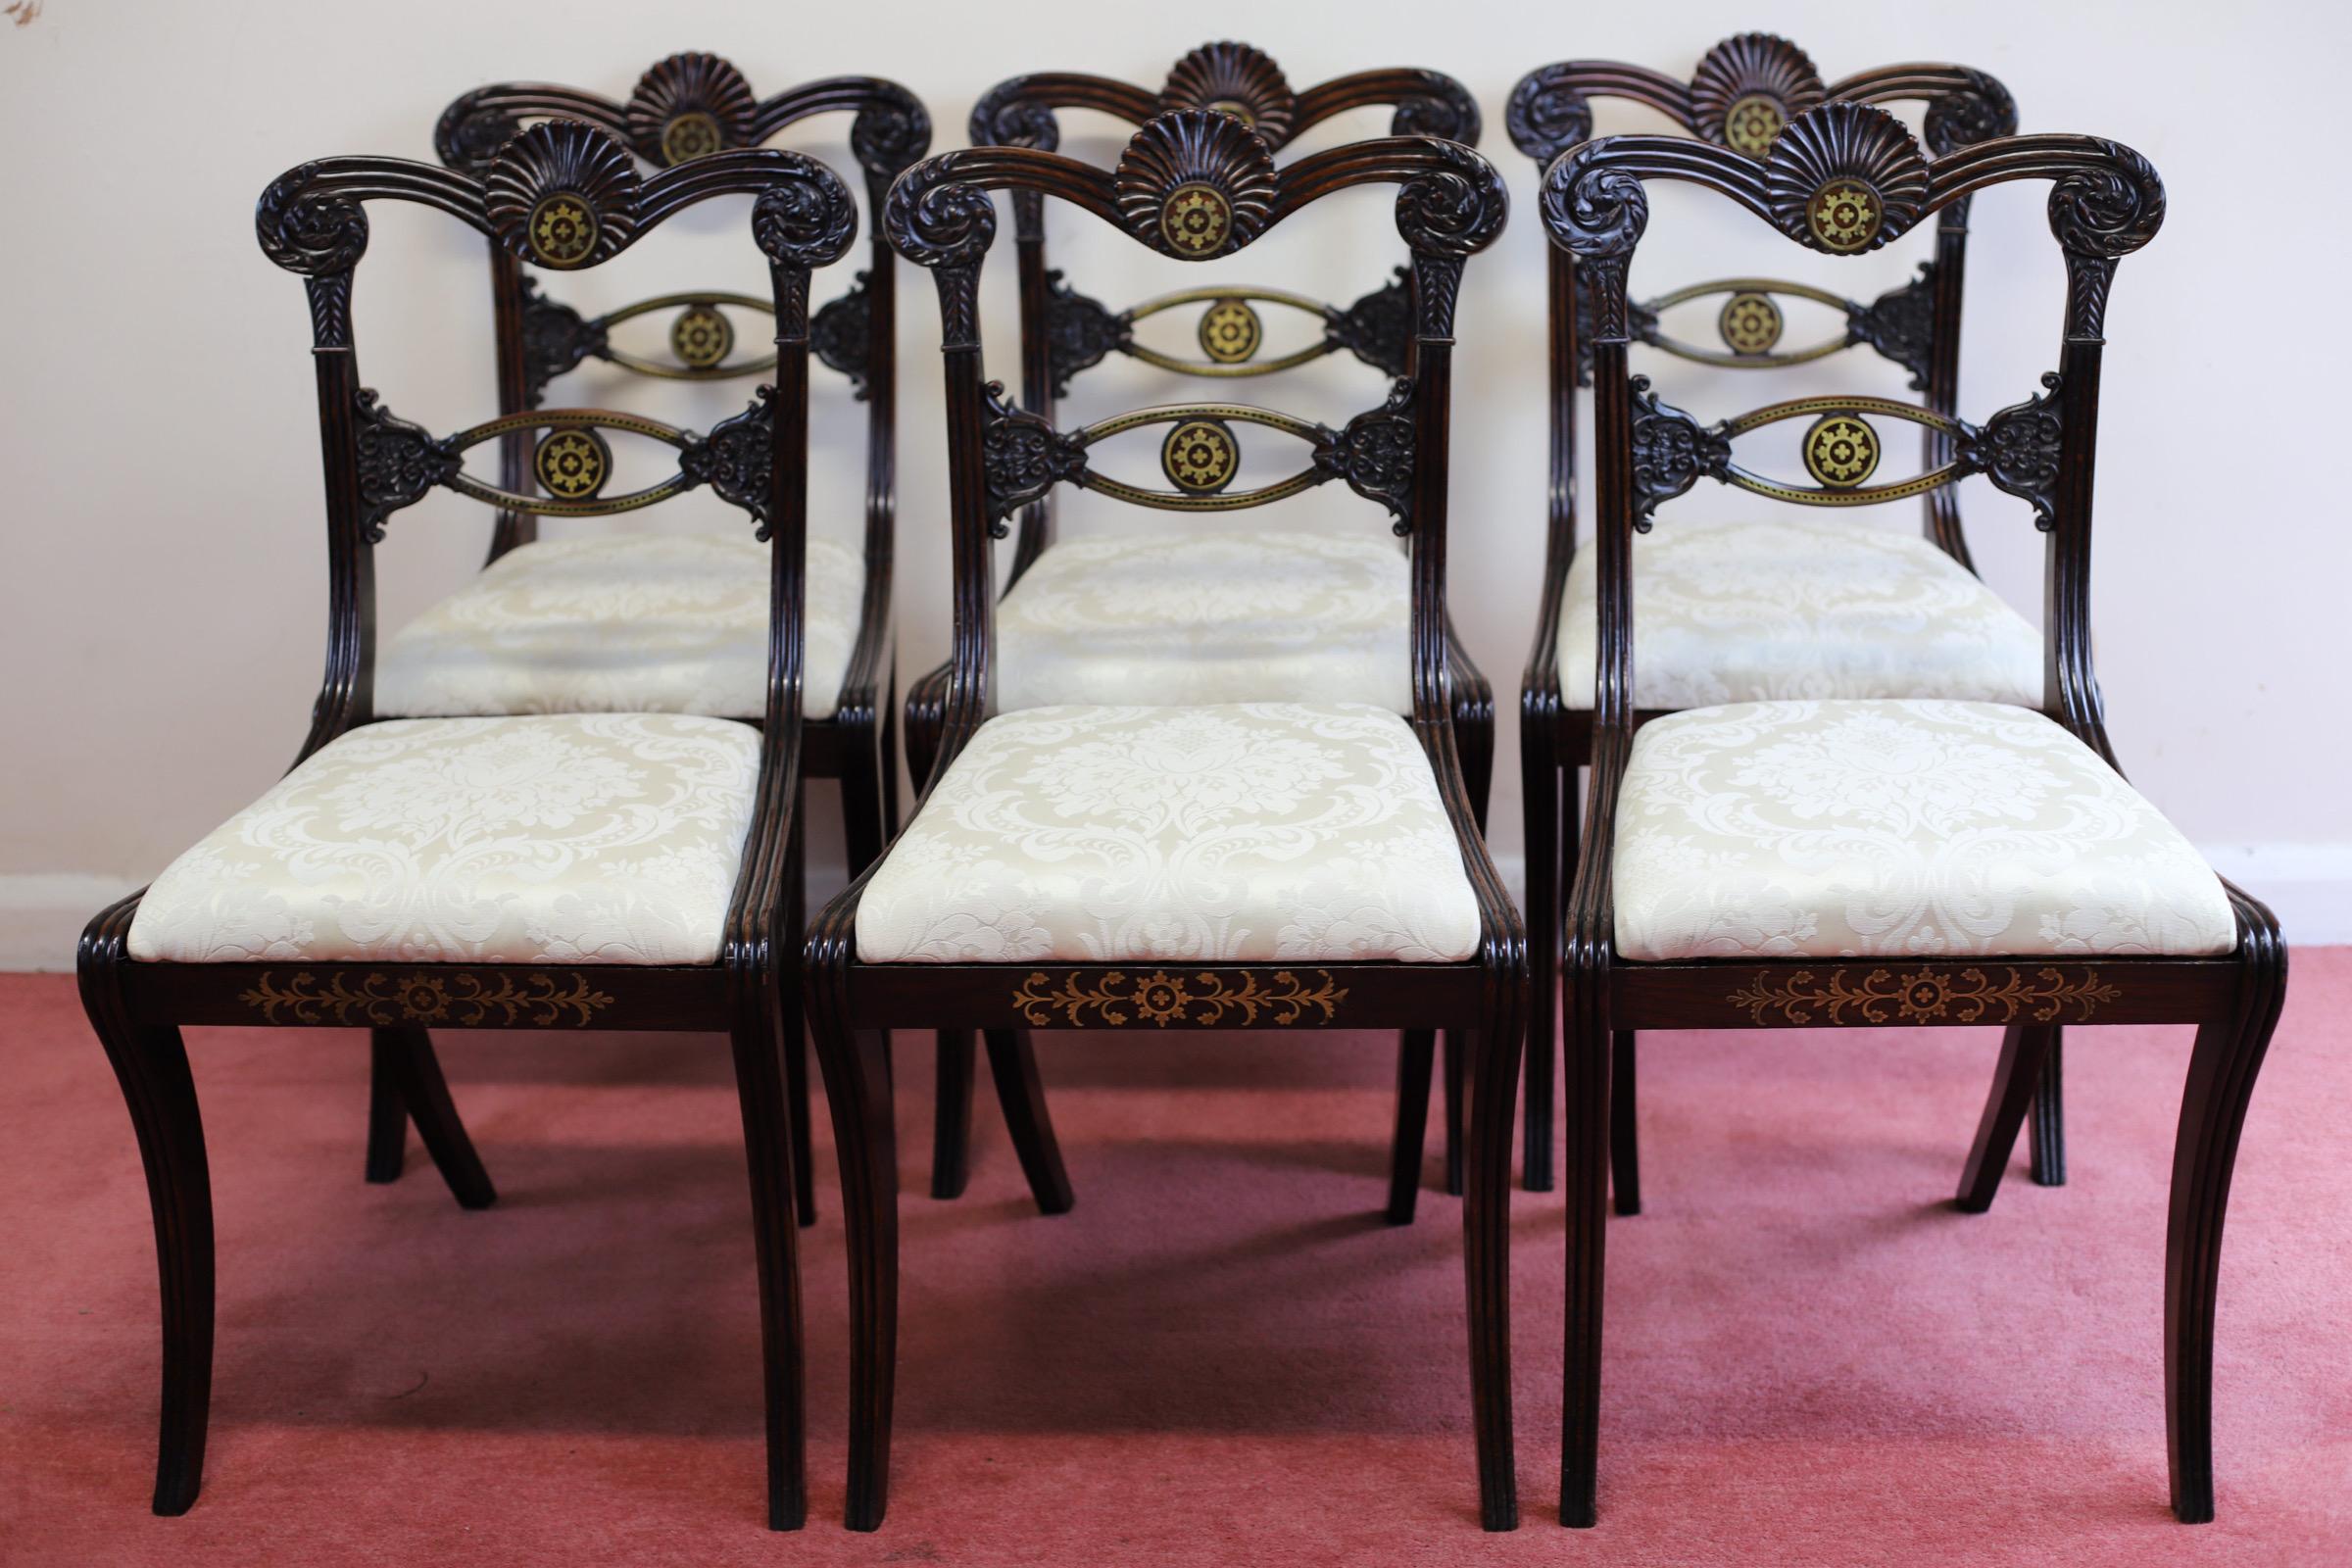 We delight to offer for sale this fantastic Set of Six Regency hardwood and Brass-Inlaid Dining Chairs, early 19th century, recovered in cream silk damask, the acanthus-scrolled and reeded top rails centred by a shell, a brass-inlaid horizontal